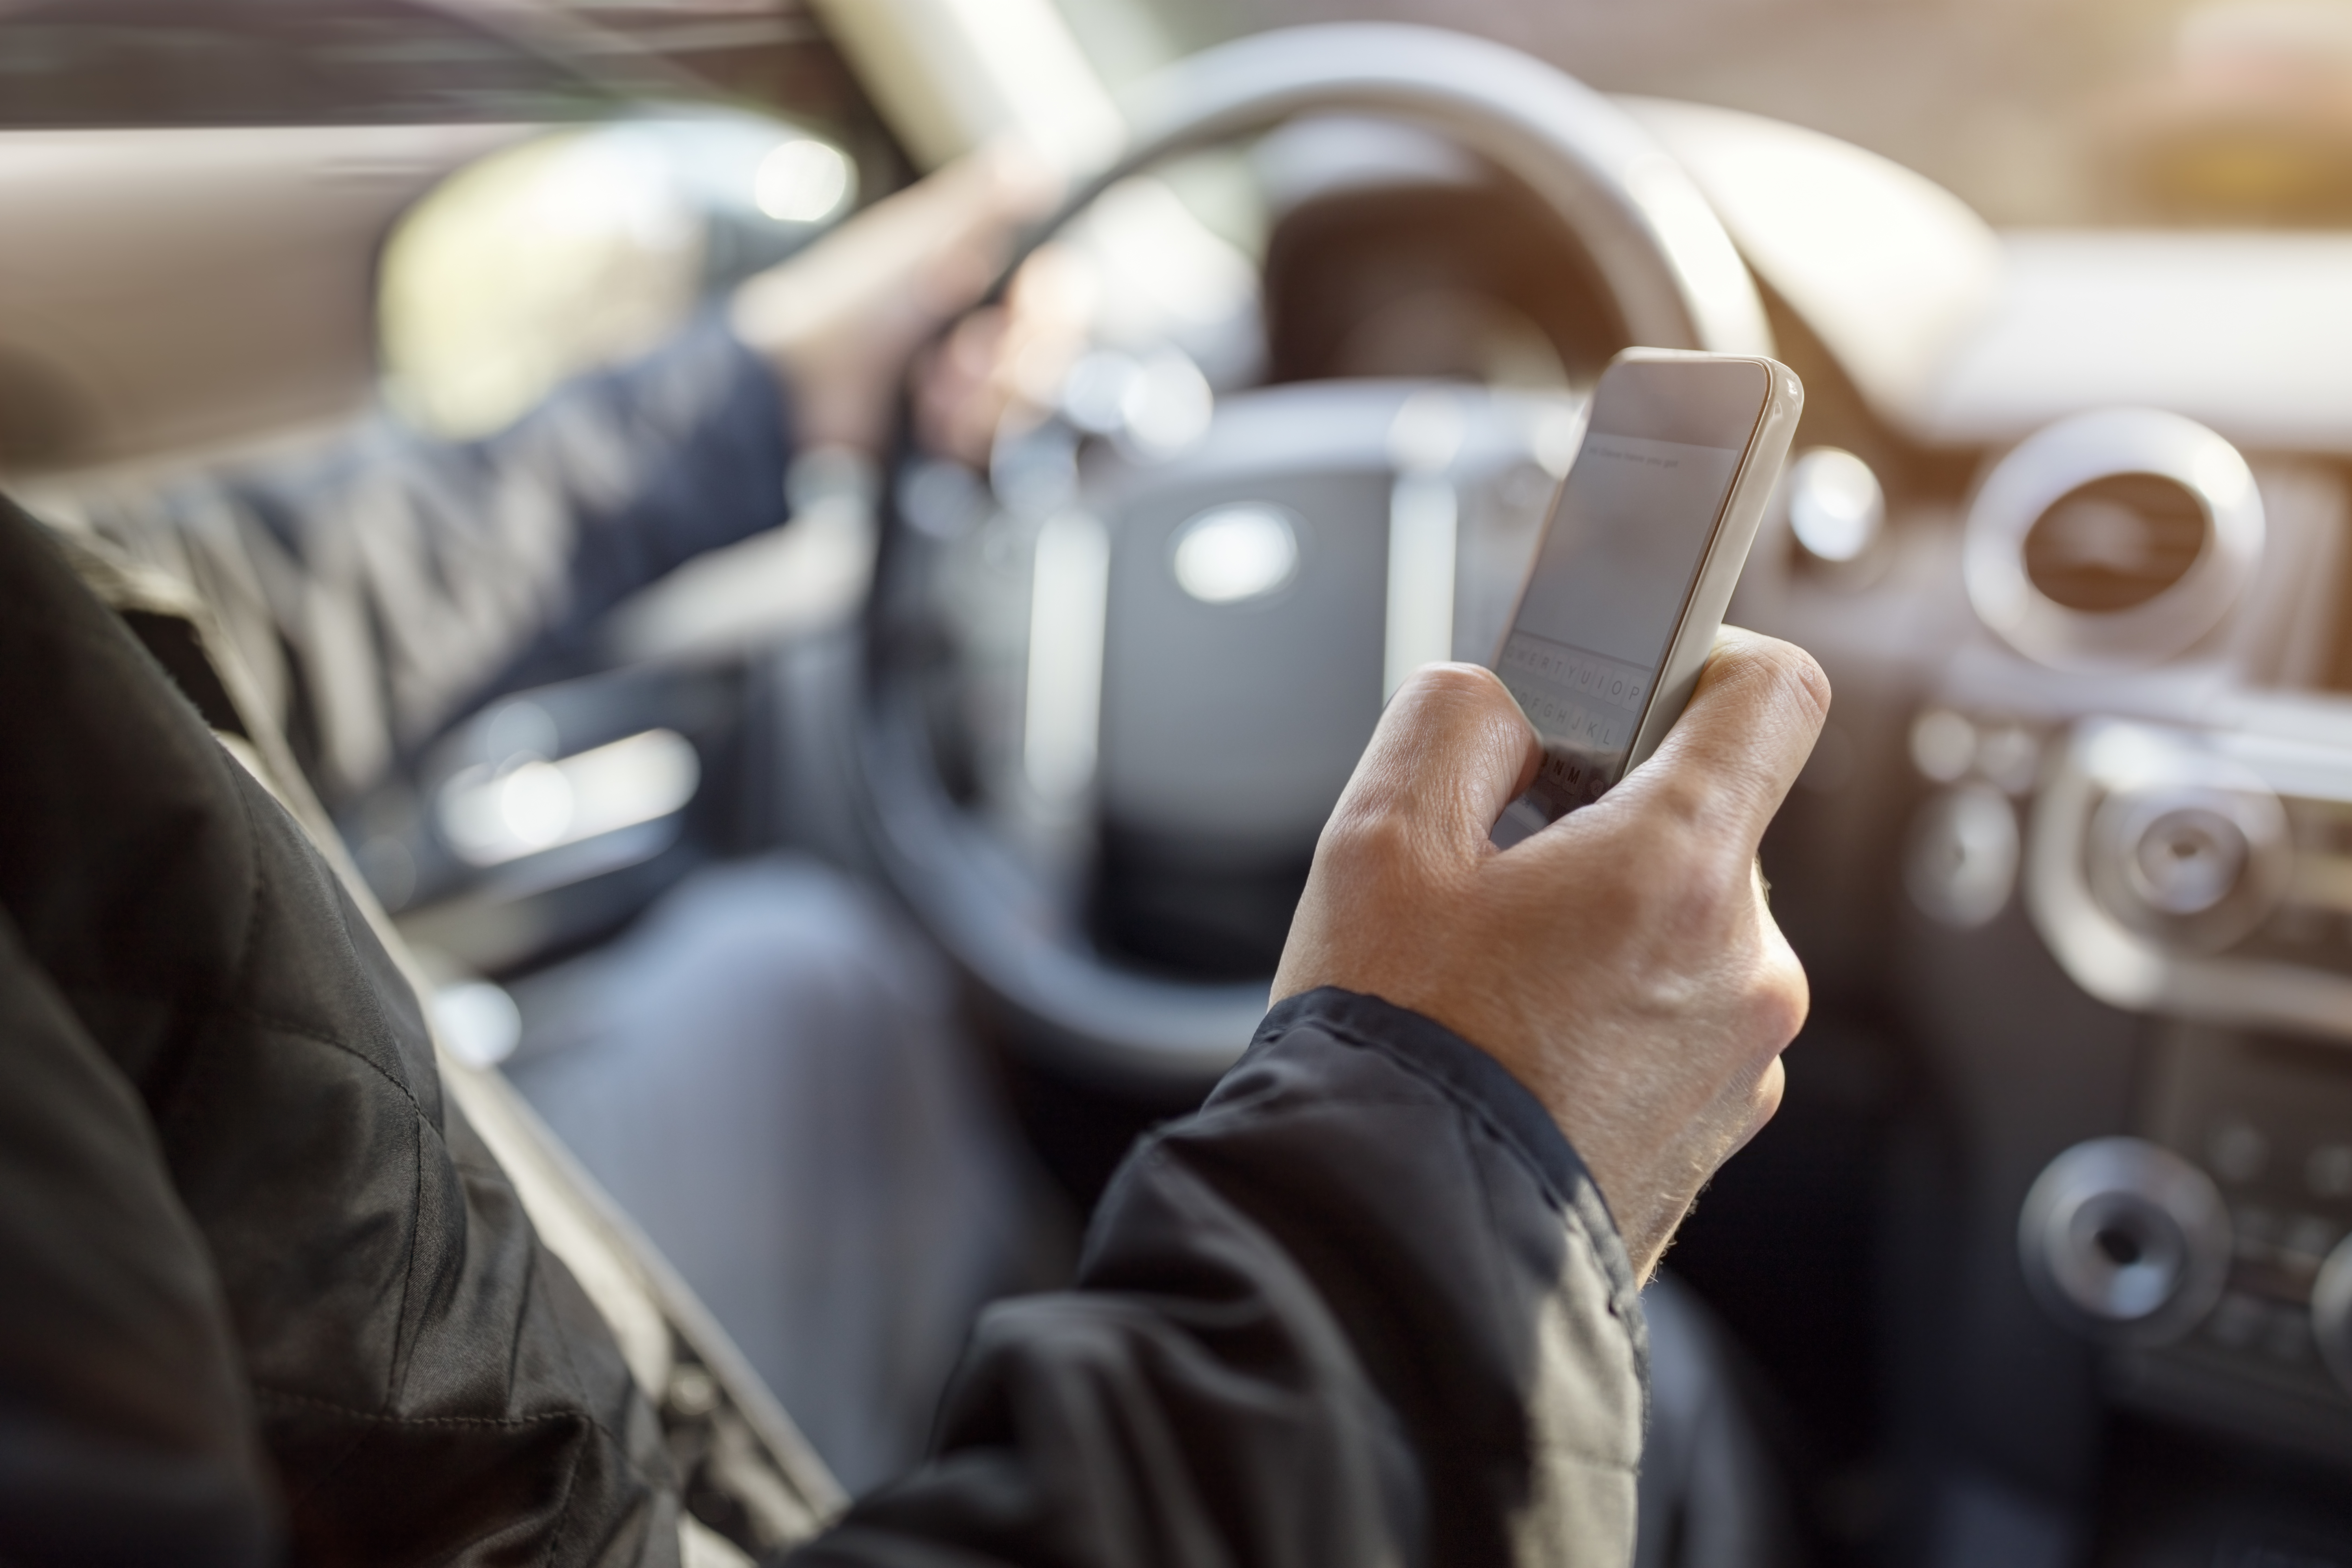 Deterring distracted driving to save dollars and lives